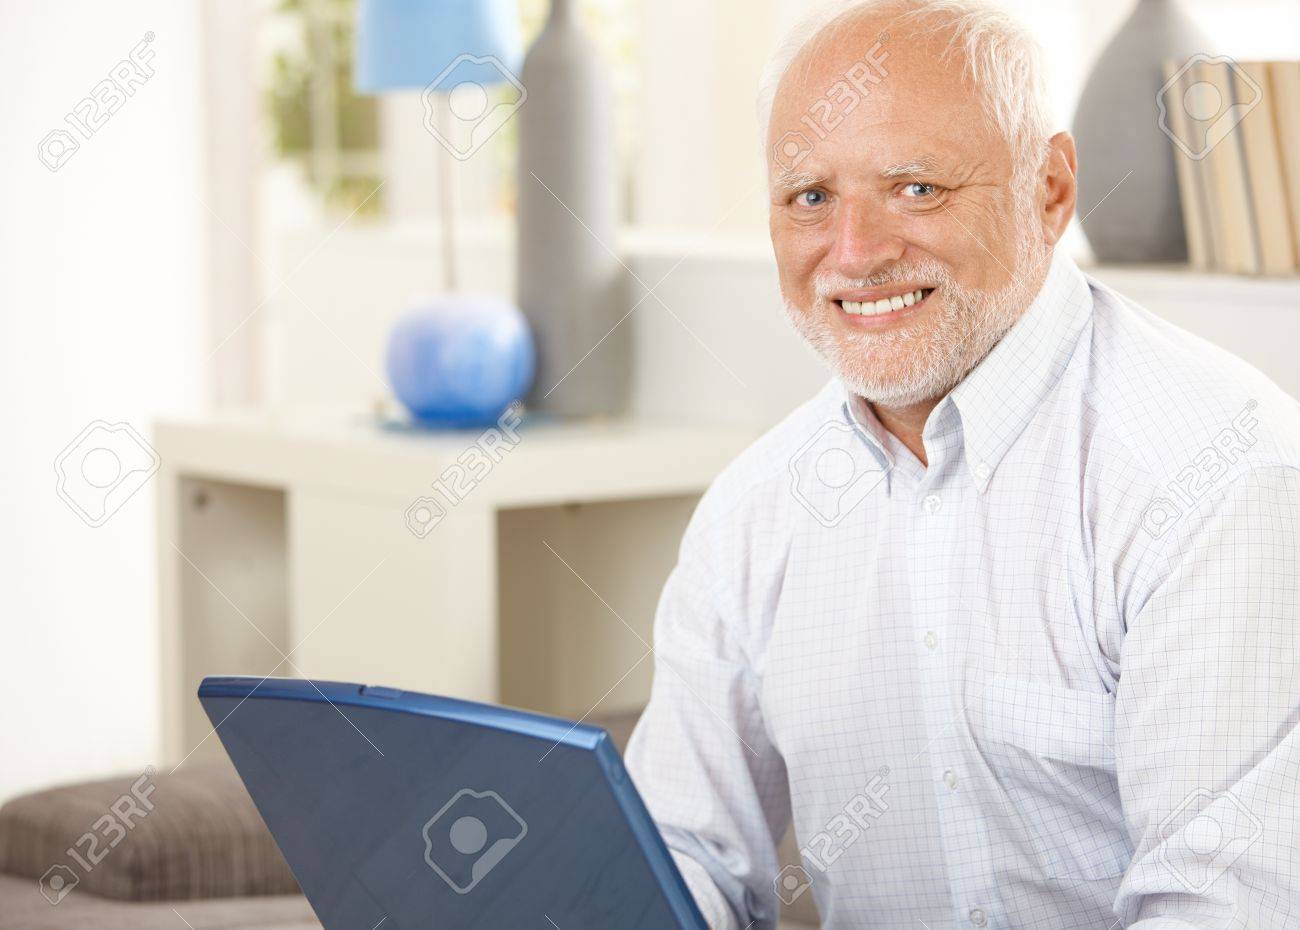 Stock image of man smiling painfully with watermark still on it